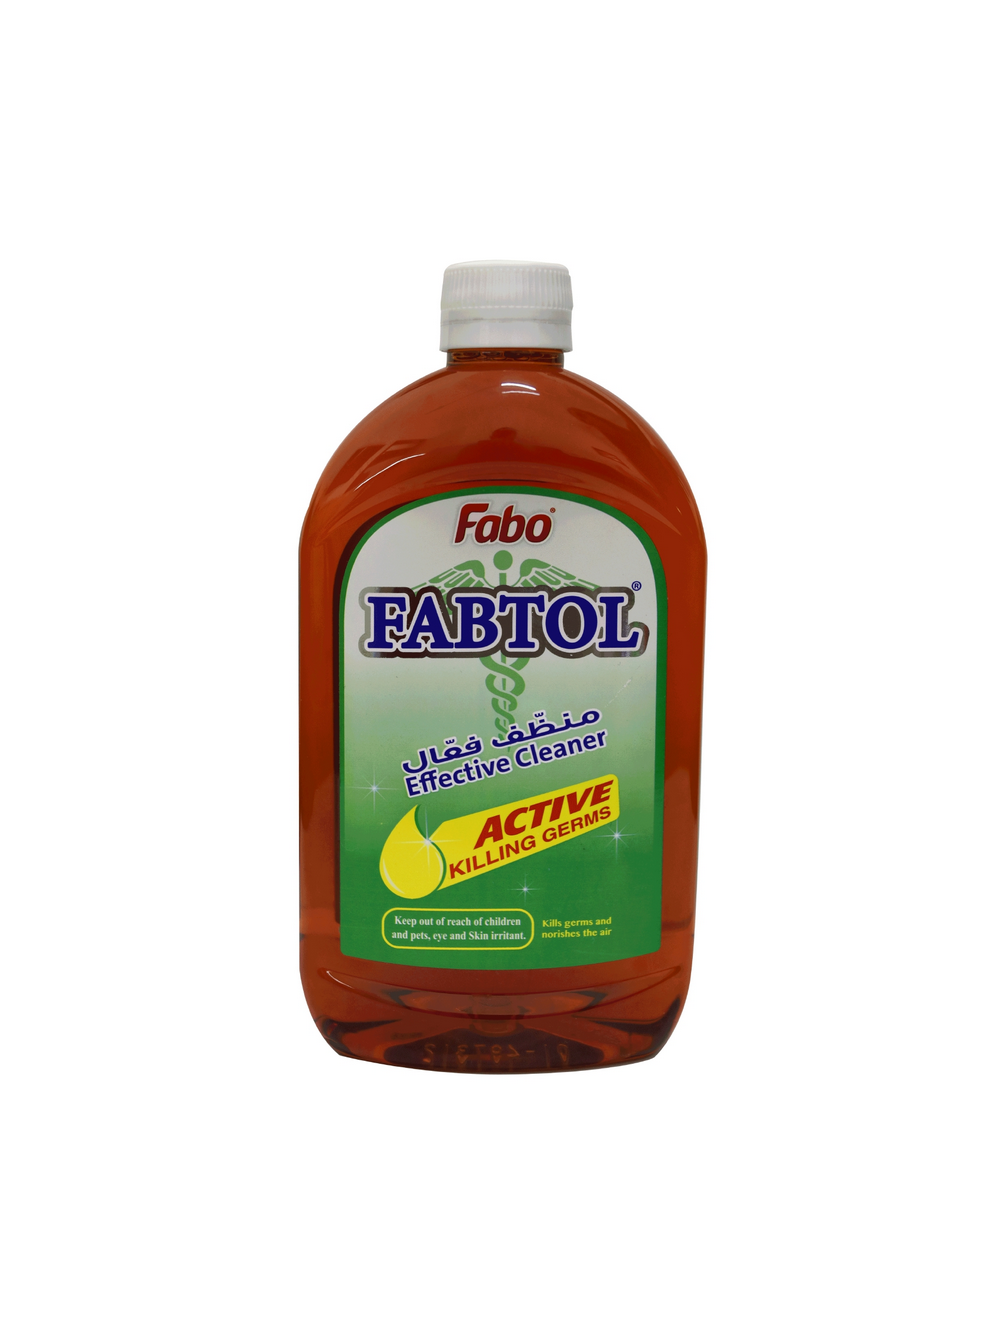 fabo-products_page-0031